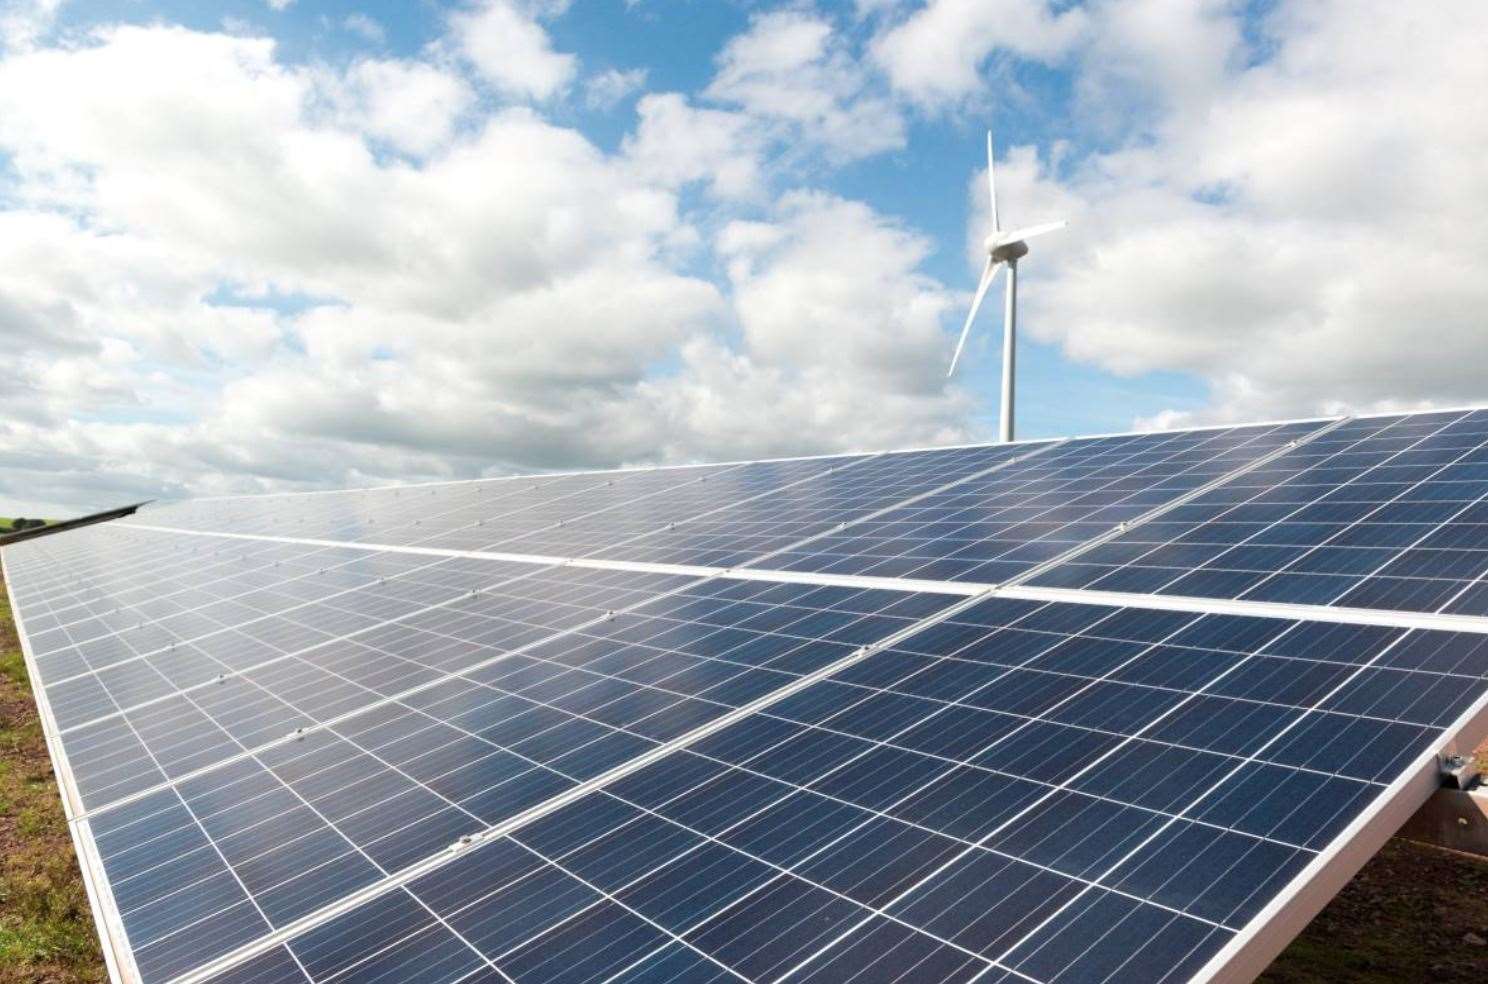 The Swedish energy giant is hoping to build a new solar farm in Herne Bay. Picture: Vattenfall